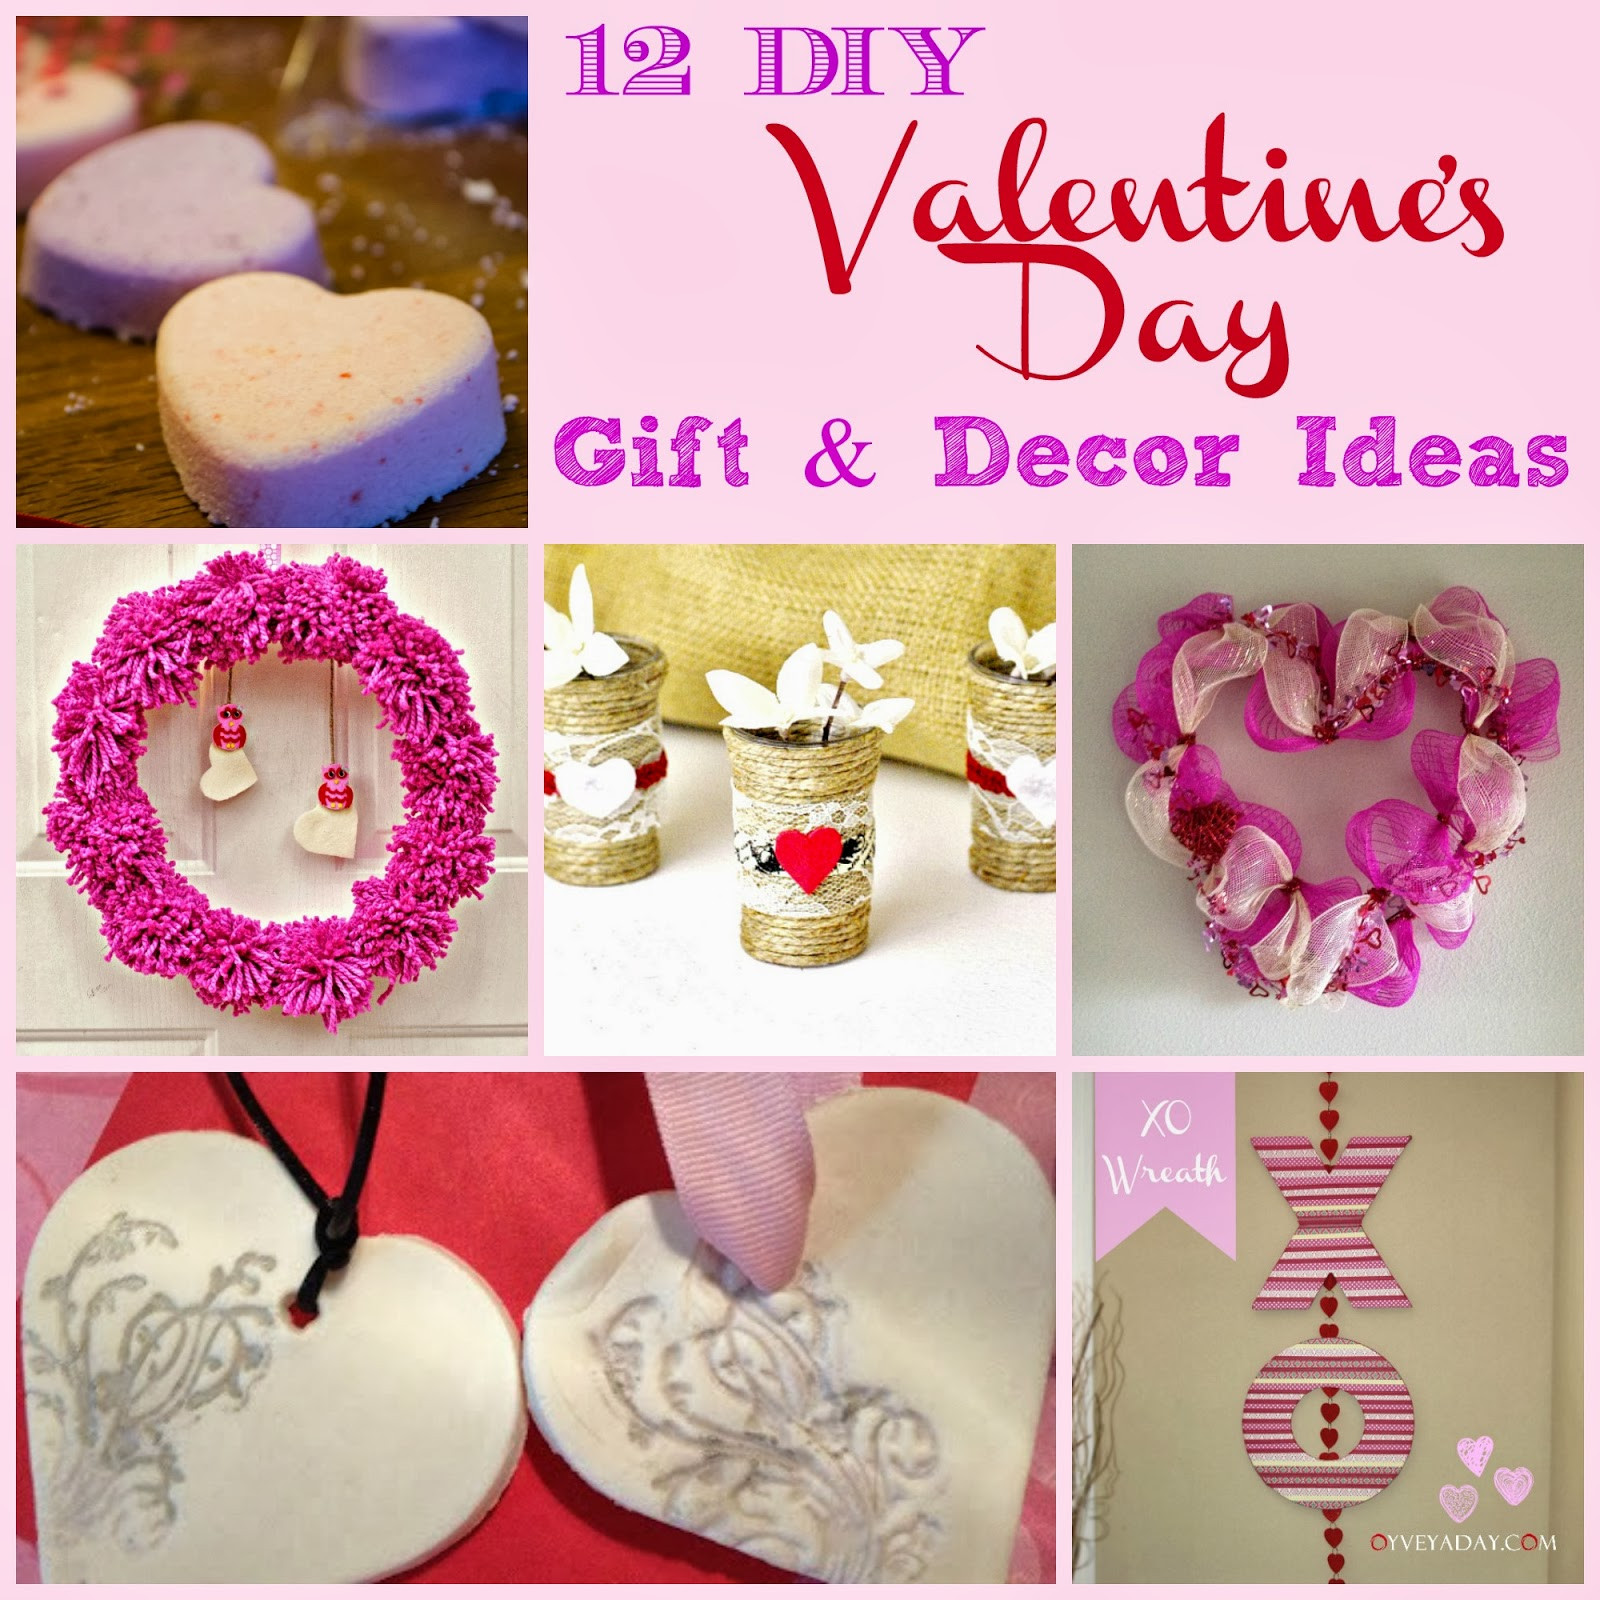 Valentine S Gift Ideas
 12 DIY Valentine s Day Gift & Decor Ideas Outnumbered 3 to 1